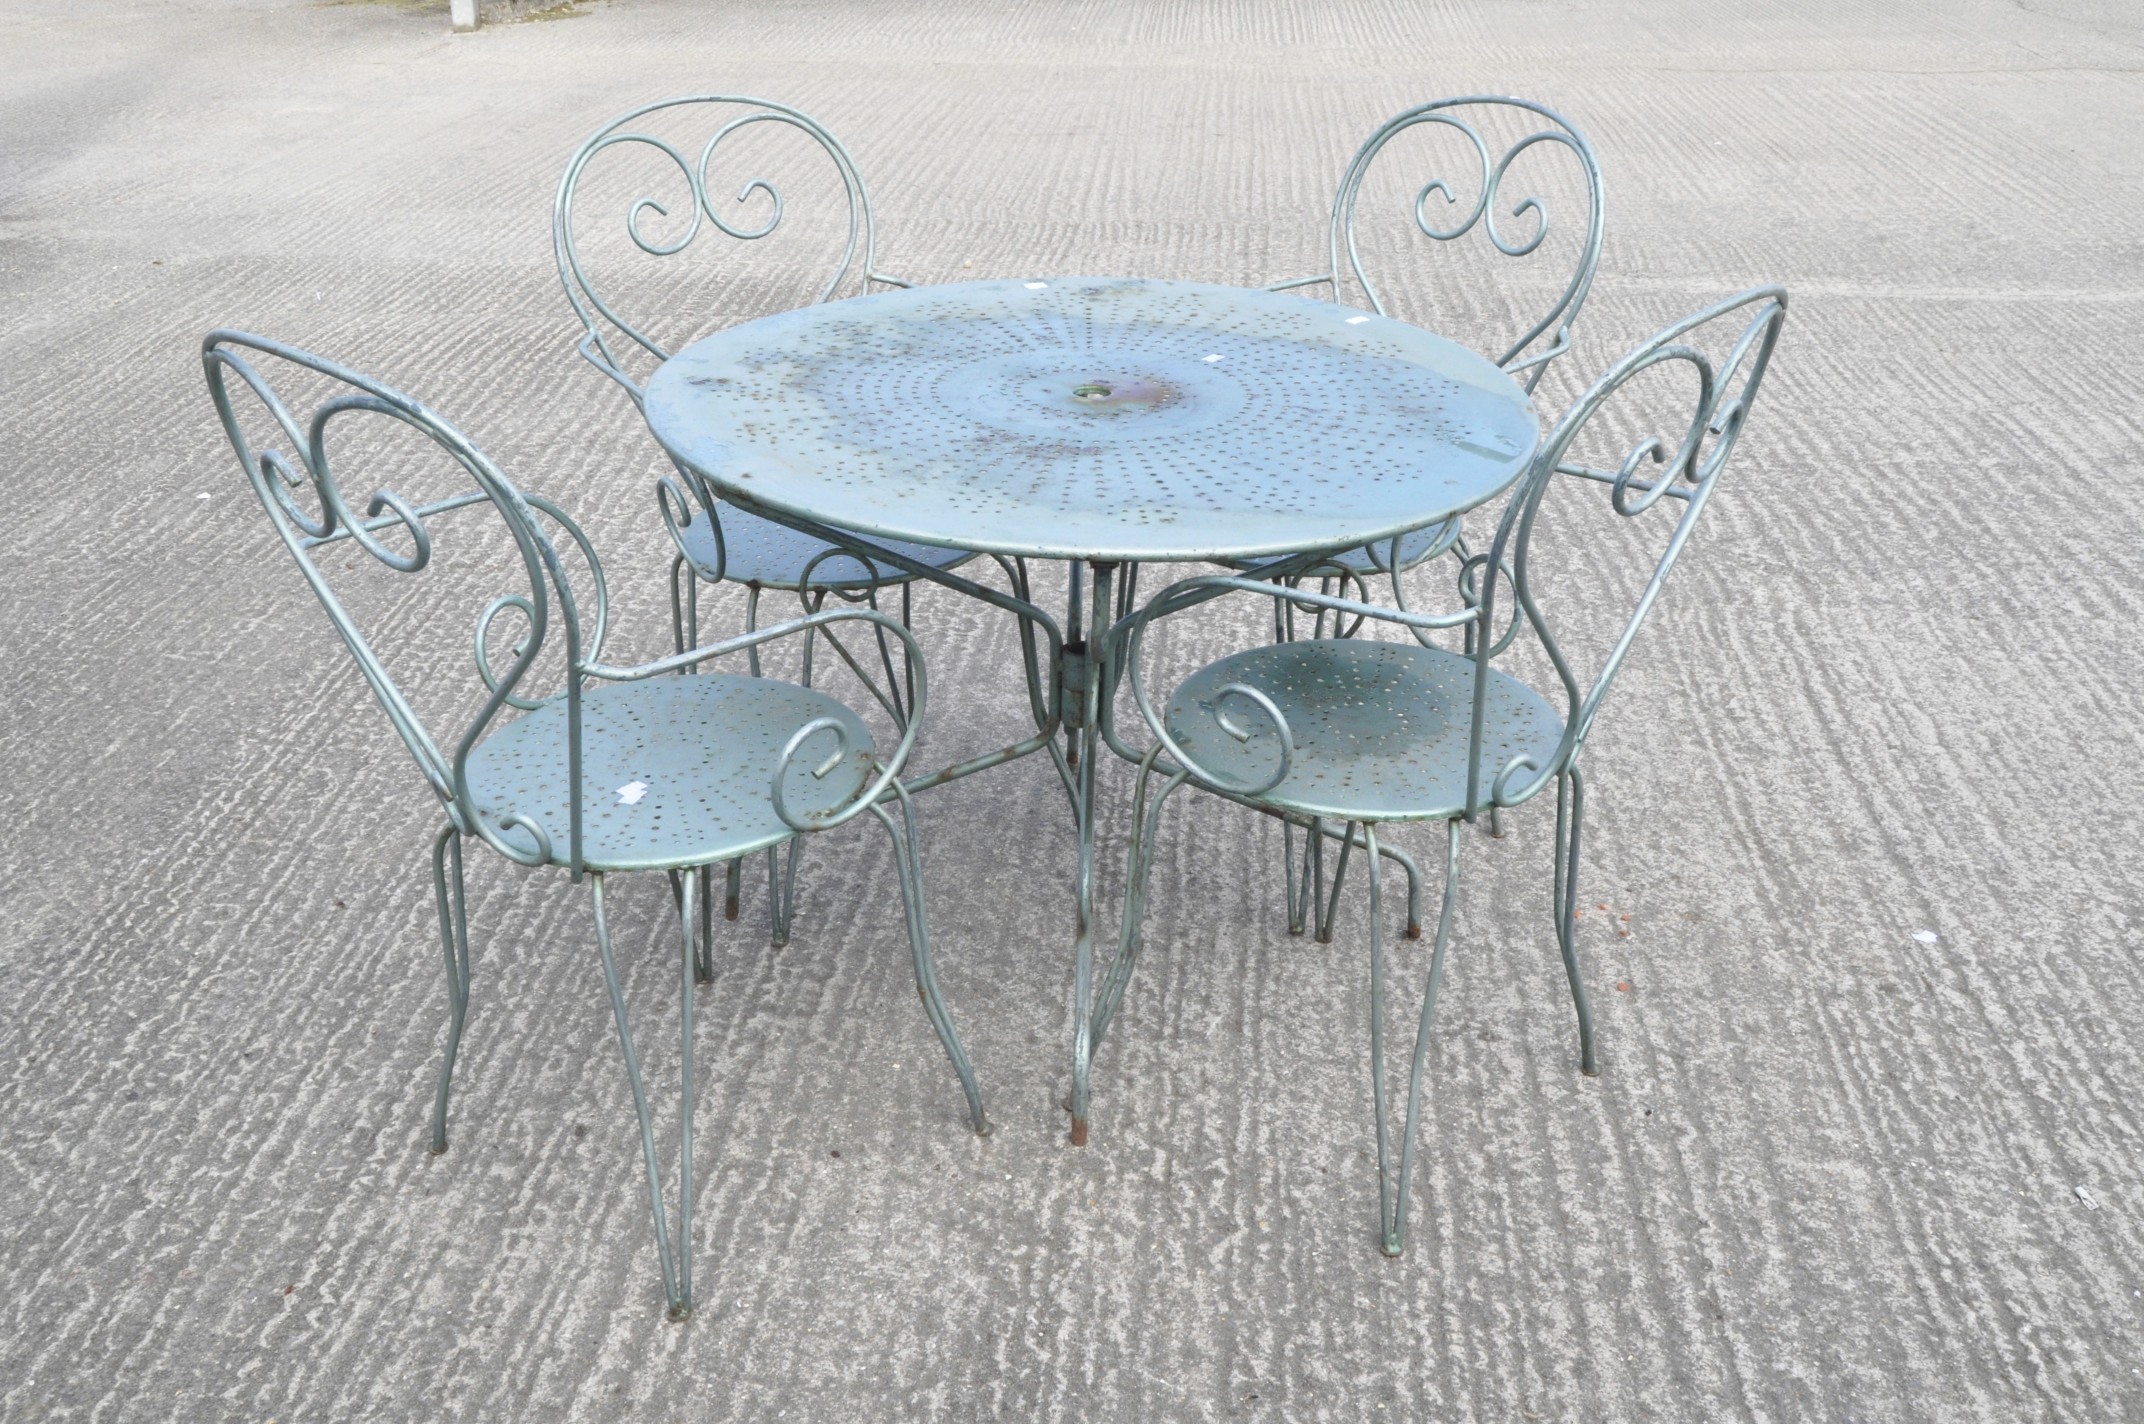 A vintage French metal table and four chairs, in metallic pale blue,